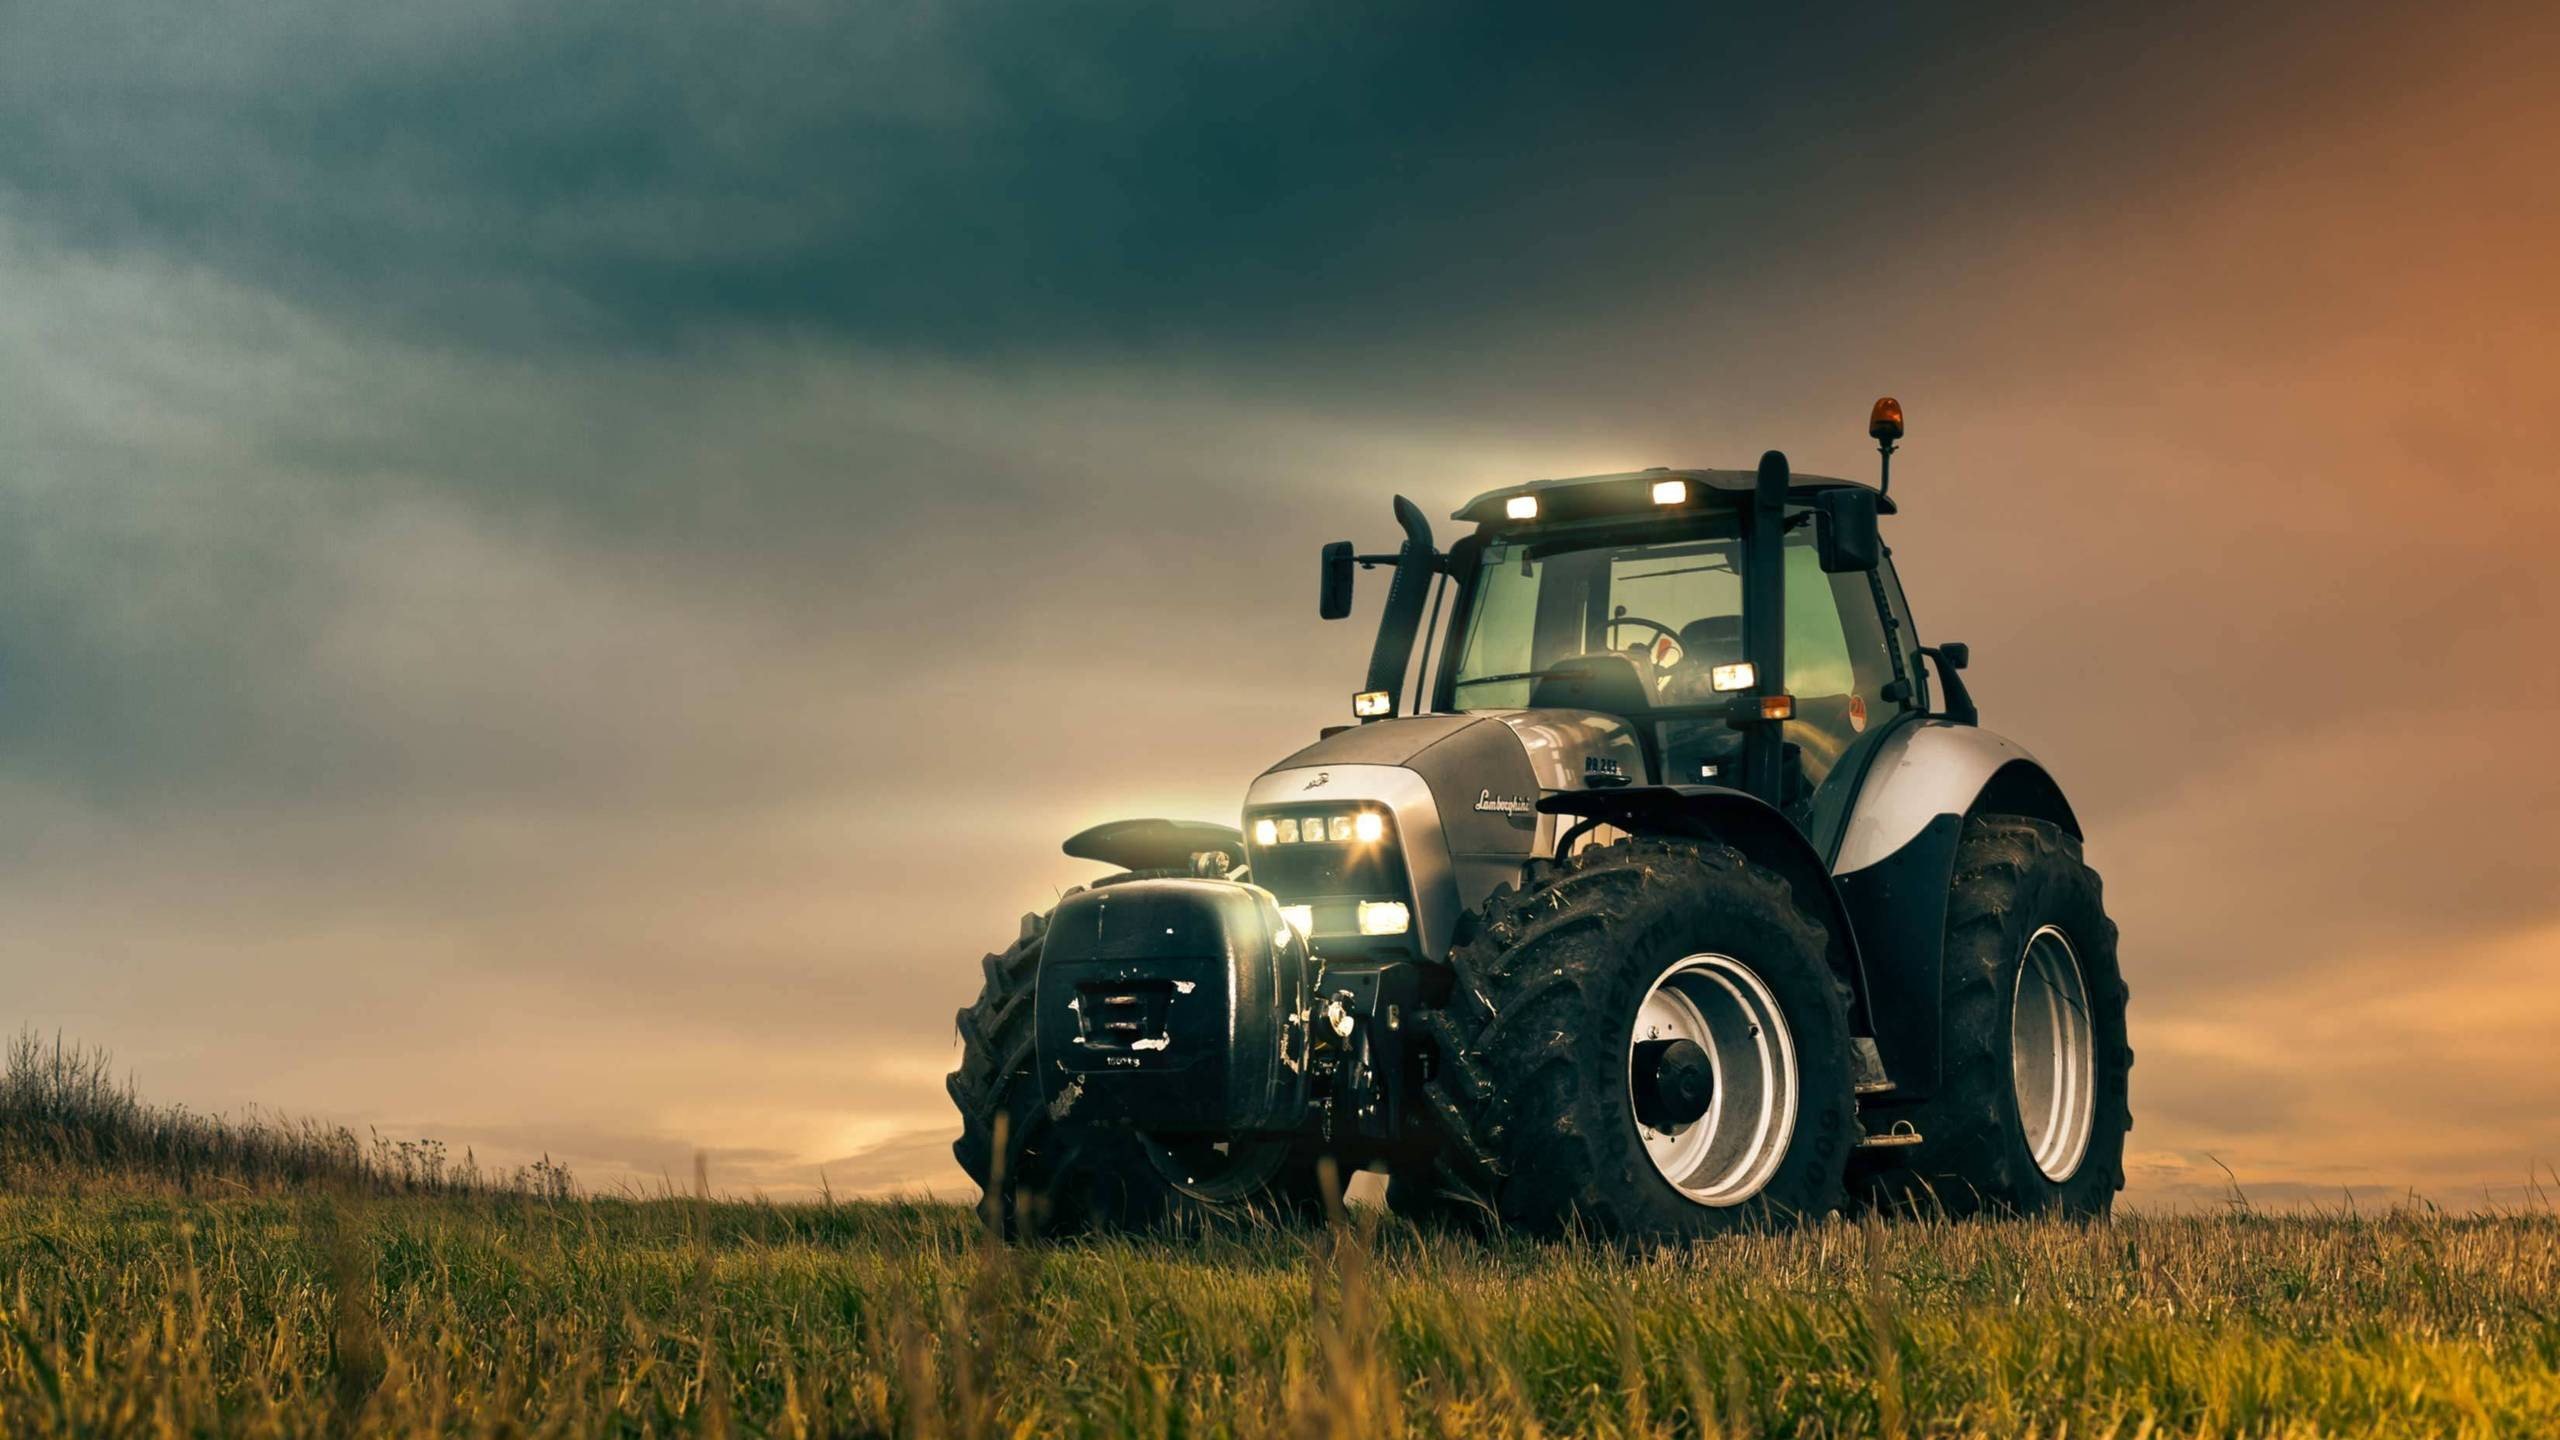 Best Tractor wallpaper ID:475920 for High Resolution hd 2560x1440 computer